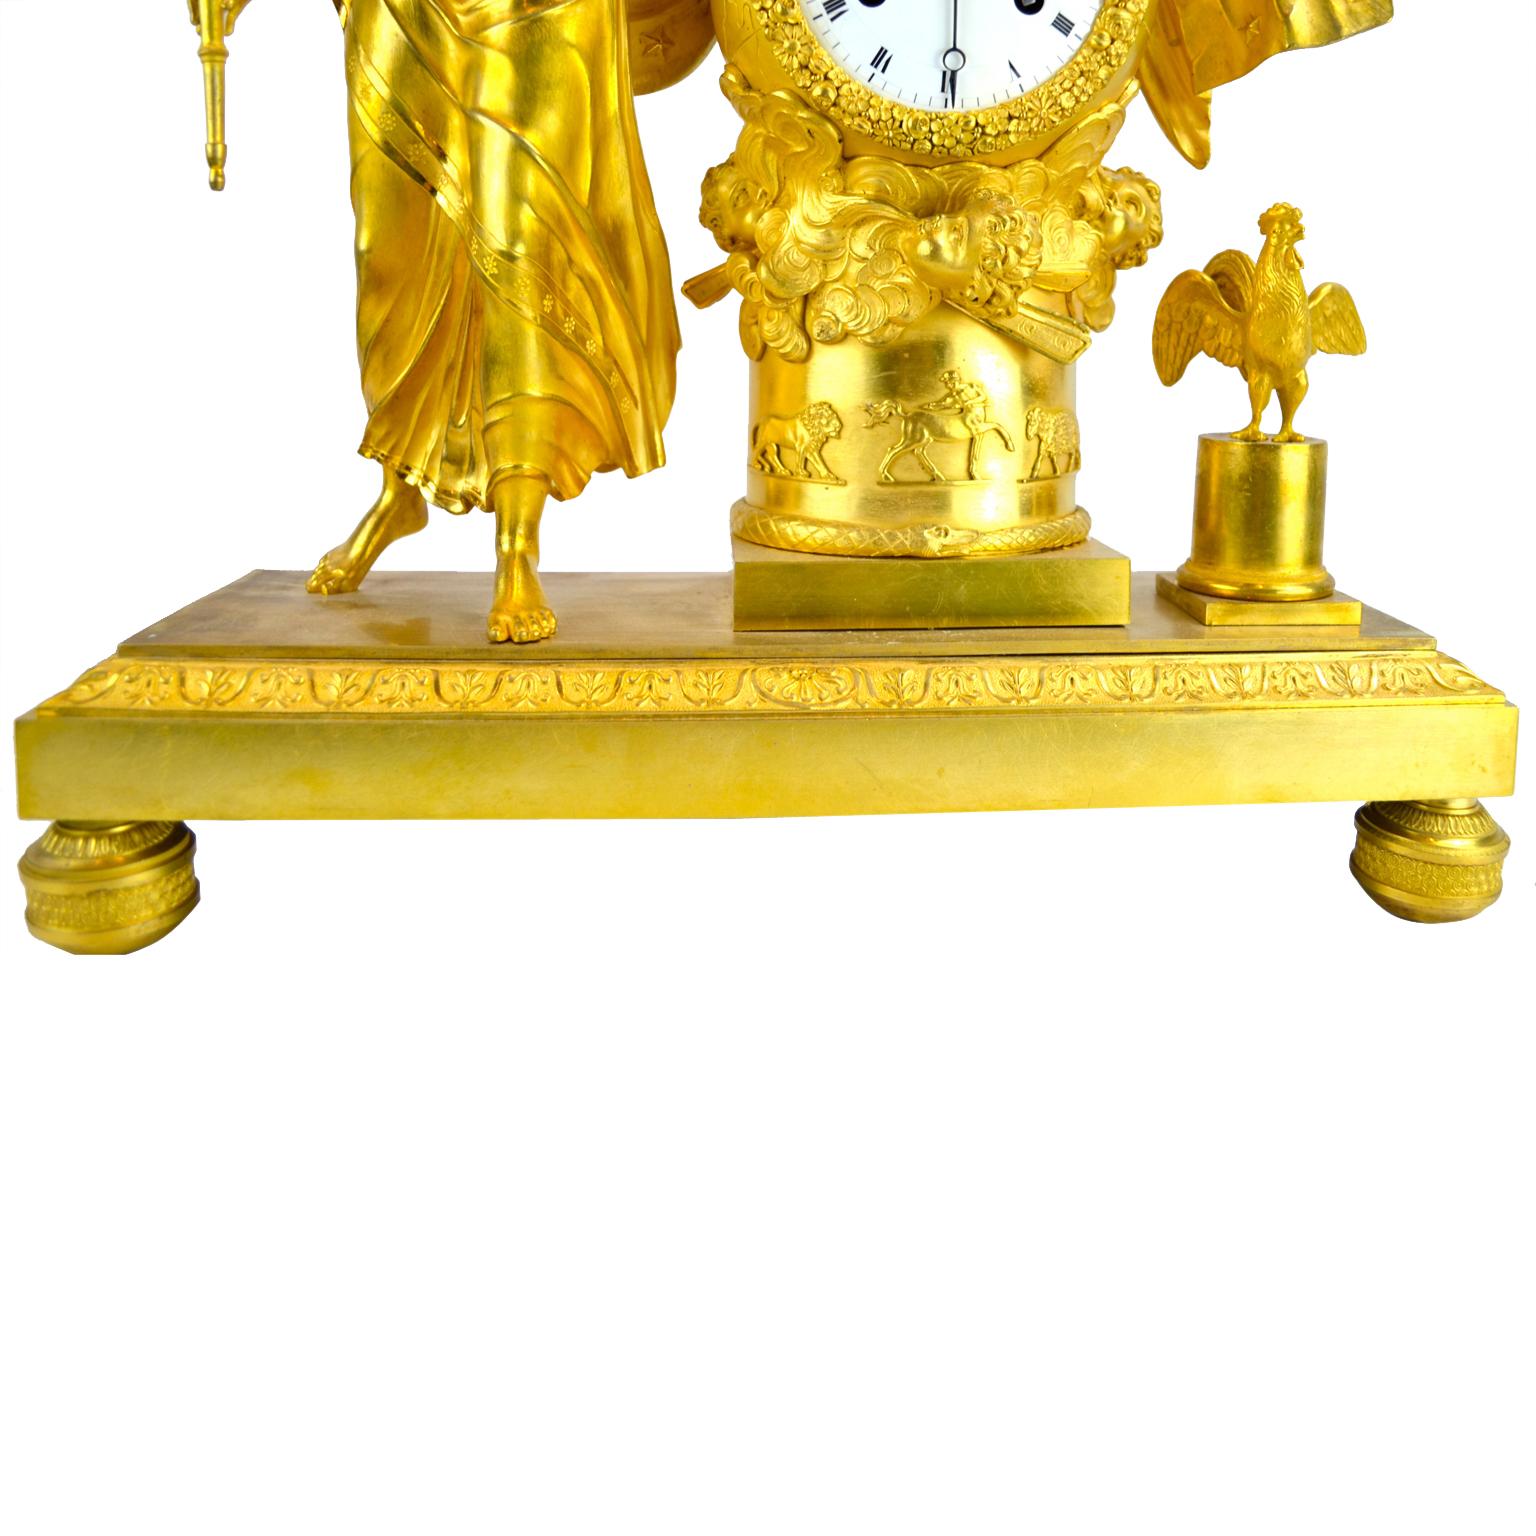   A French Empire Clock of the Roman Goddess Aurora Announcing a New Day In Good Condition For Sale In Vancouver, British Columbia